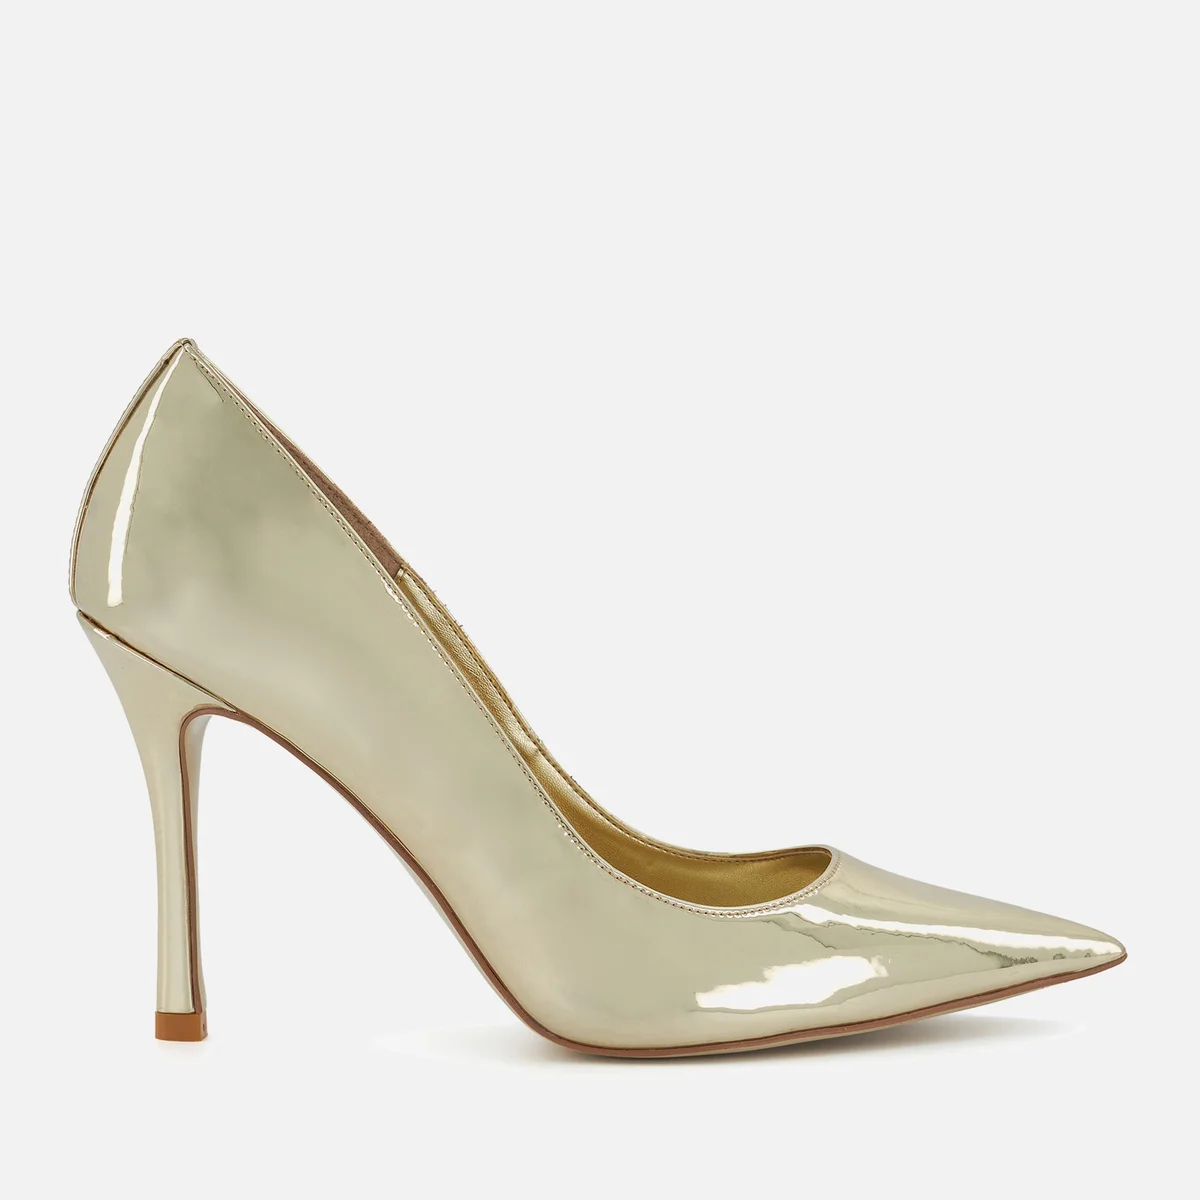 Dune Women's Attention Metallic Patent-Leather Heeled Pumps Image 1